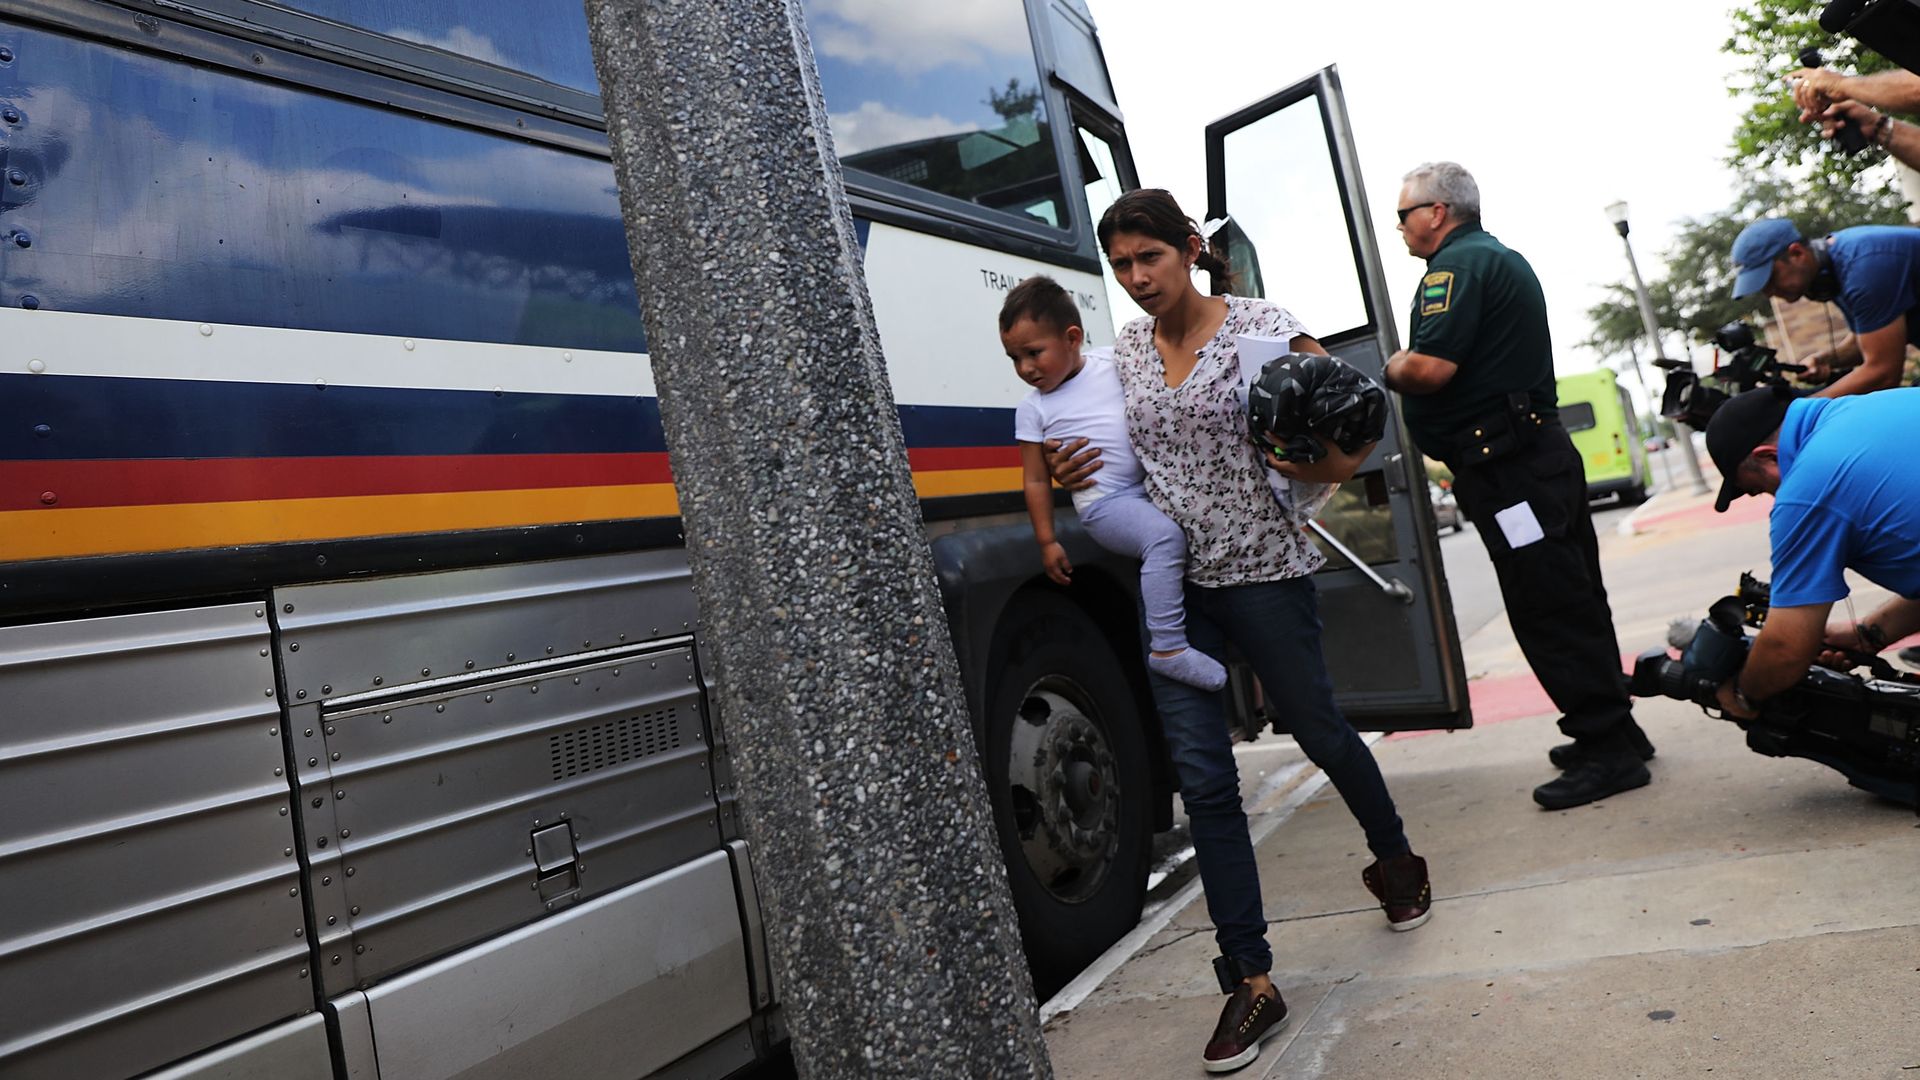 A migrant woman and her child get off a bus